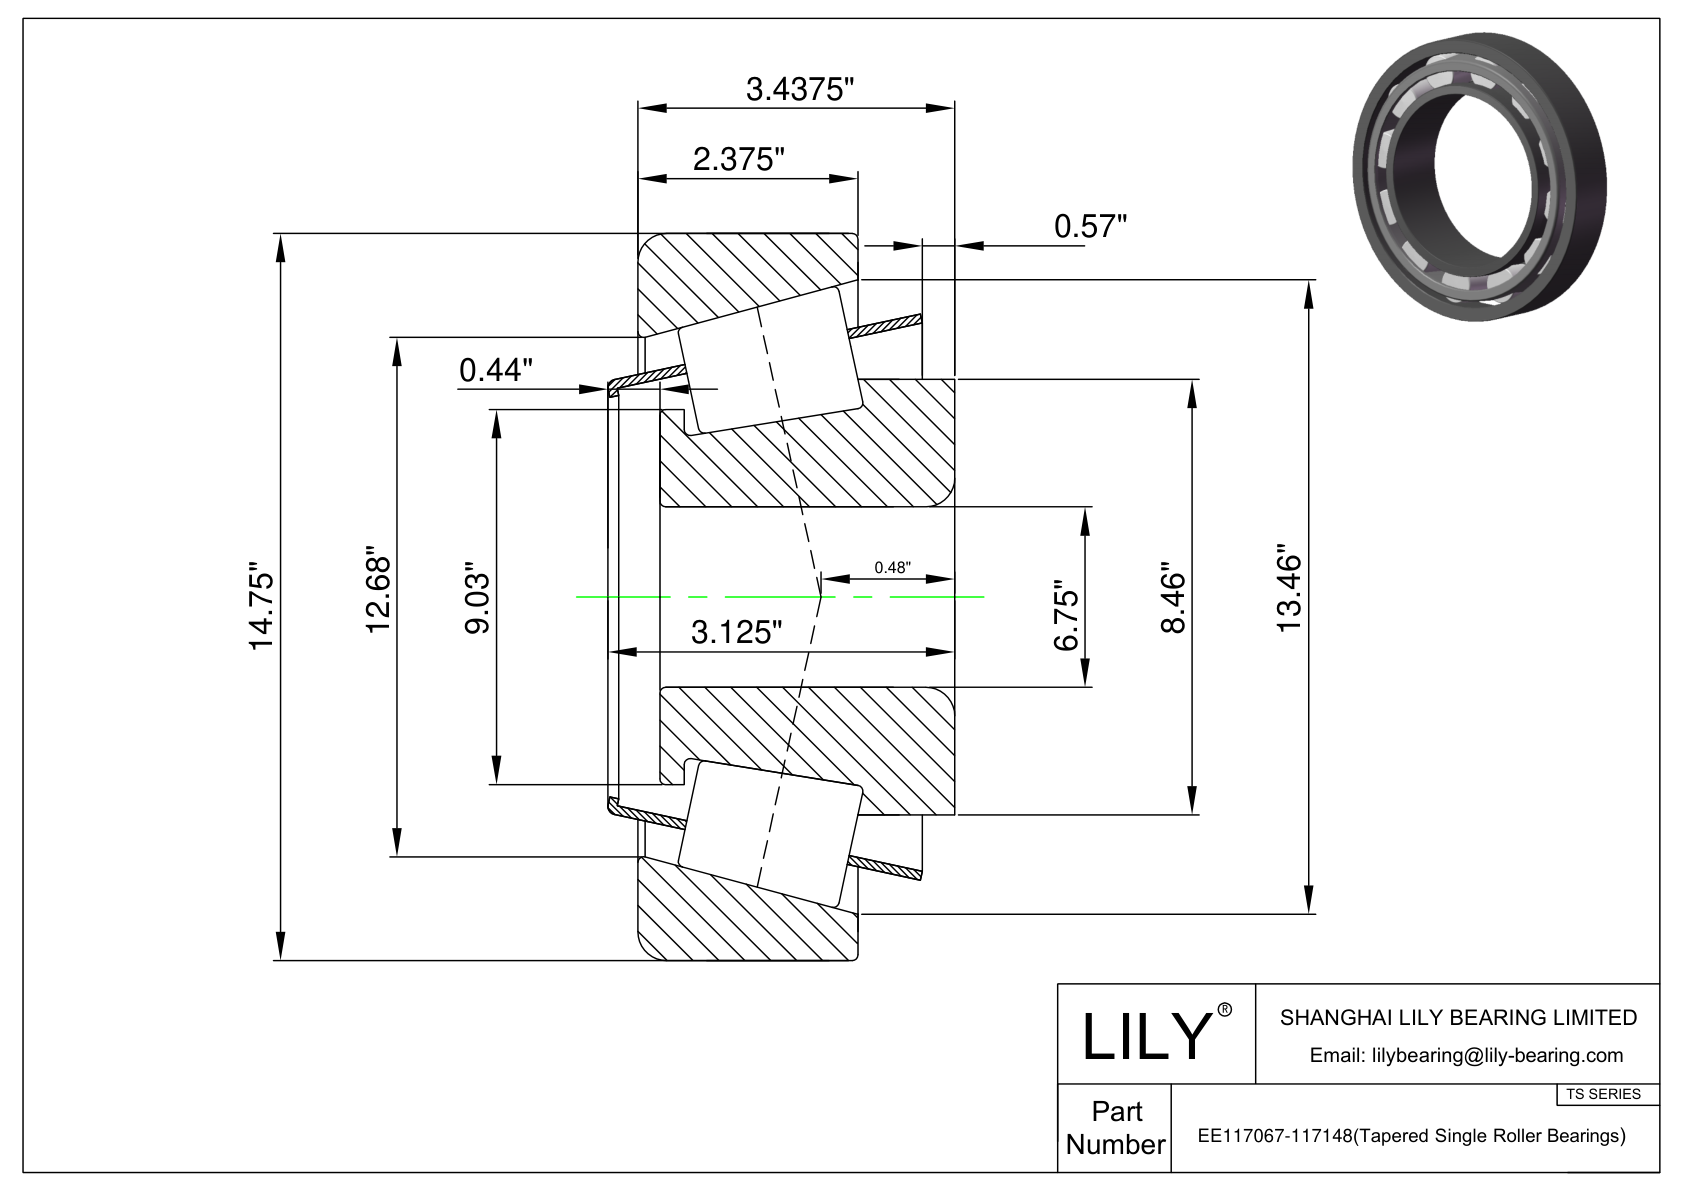 EE117067-117148 TS (Tapered Single Roller Bearings) (Imperial) cad drawing